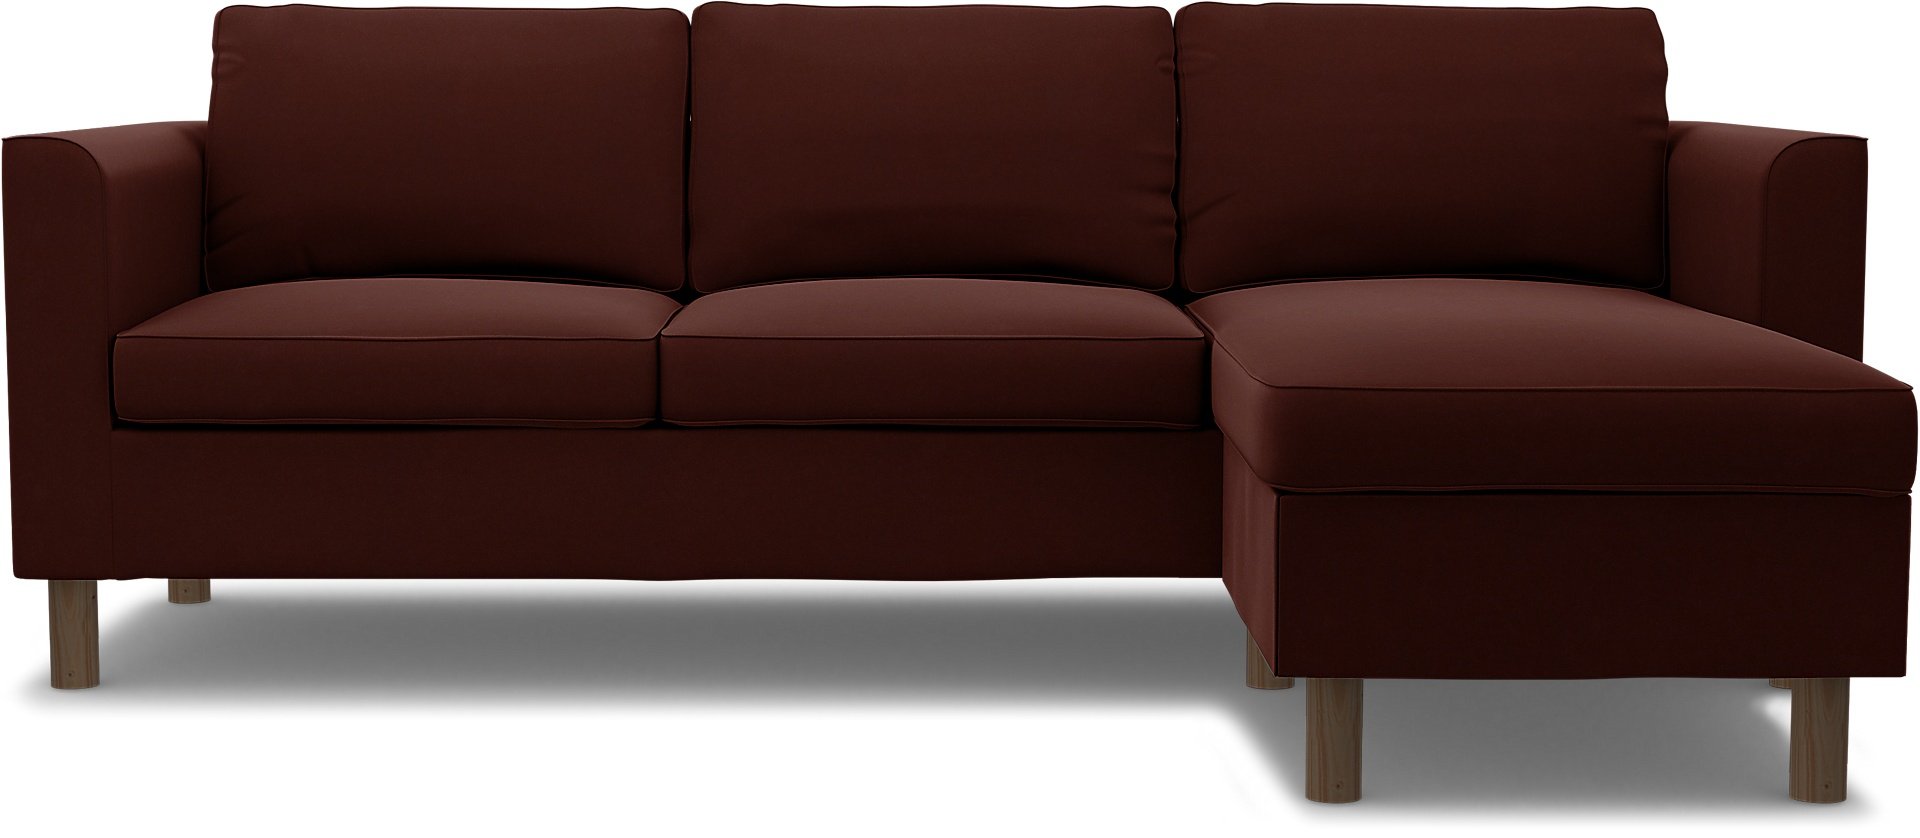 IKEA - Parup 3 Seater with chaise longue, Ground Coffee, Velvet - Bemz